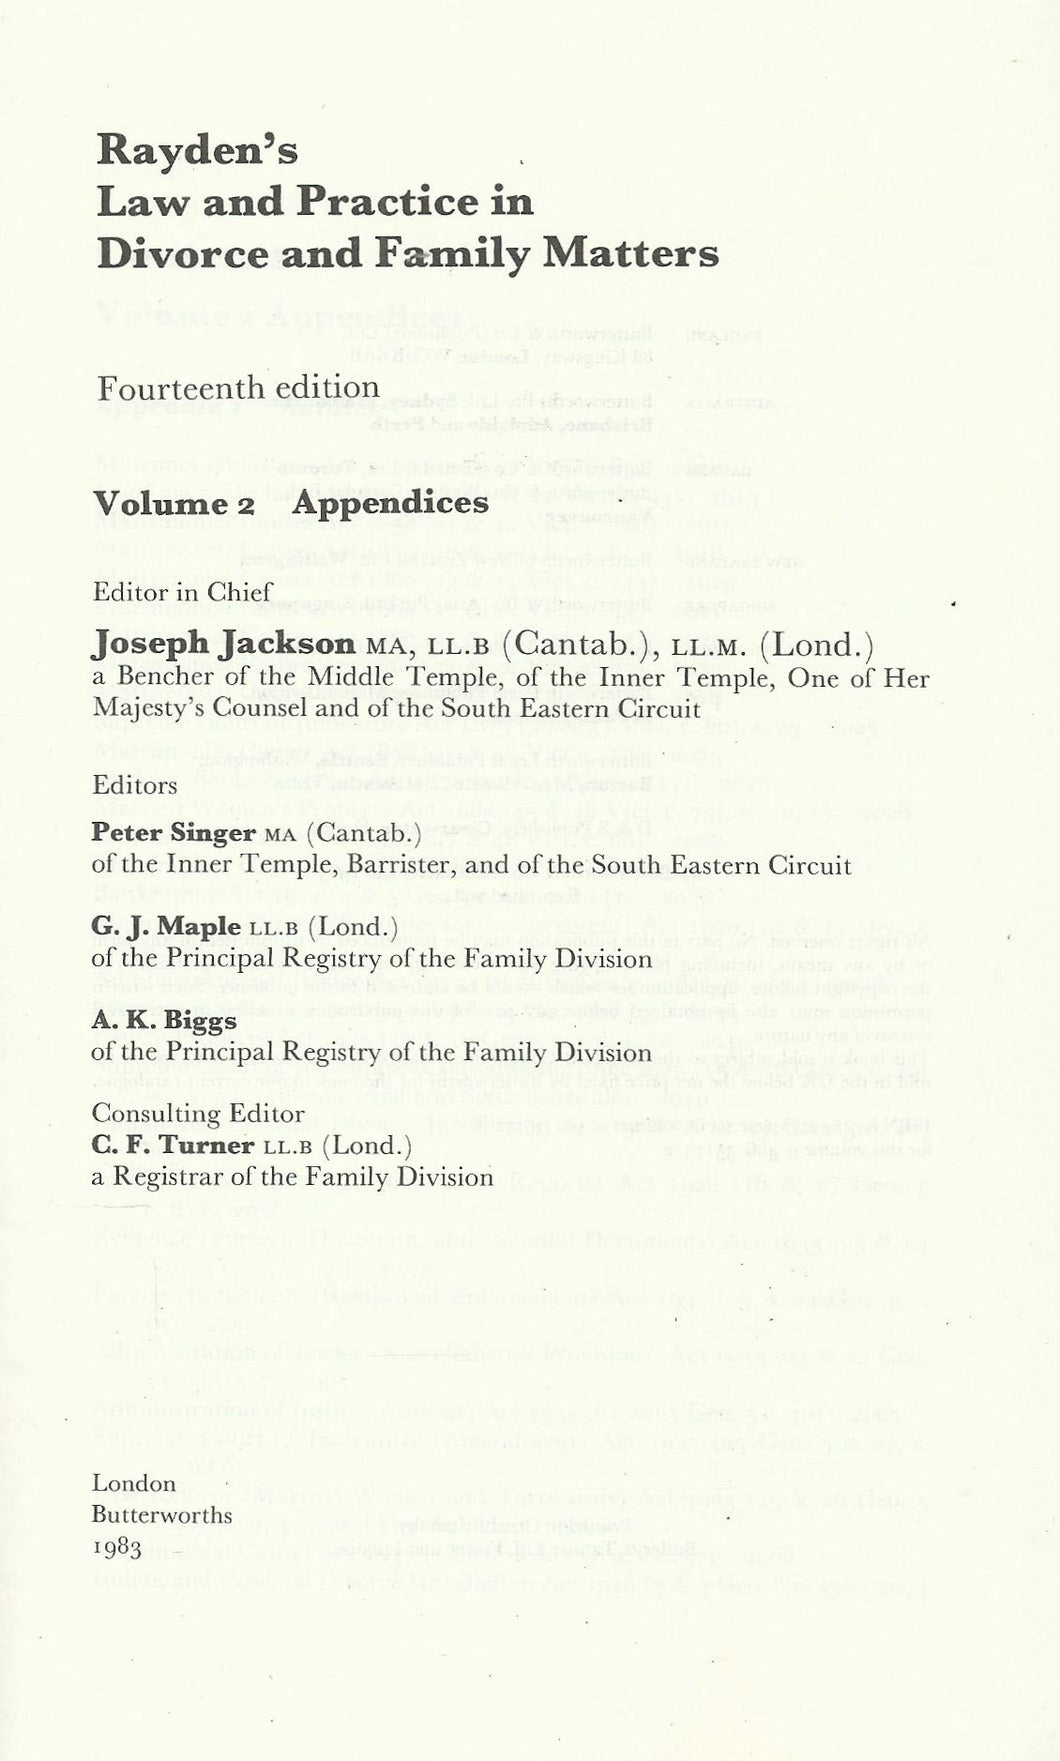 Rayden's Law and Practice in Divorce and Family Matters - Volume 2, Appendices - Fourteenth Edition